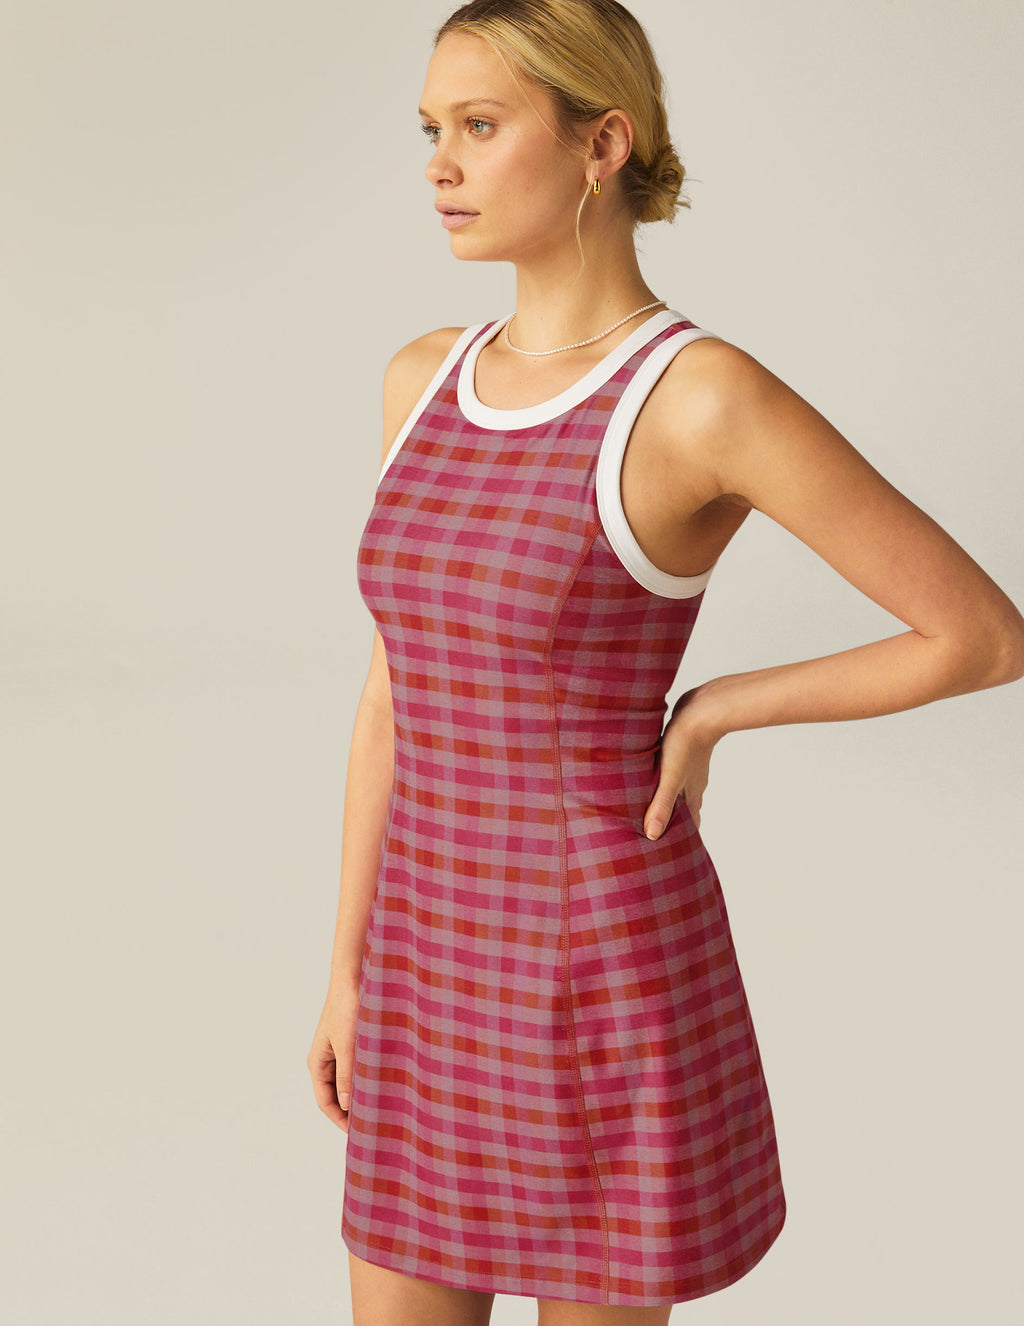 Pink Gingham SoftMark Outlines Dress Featured Image